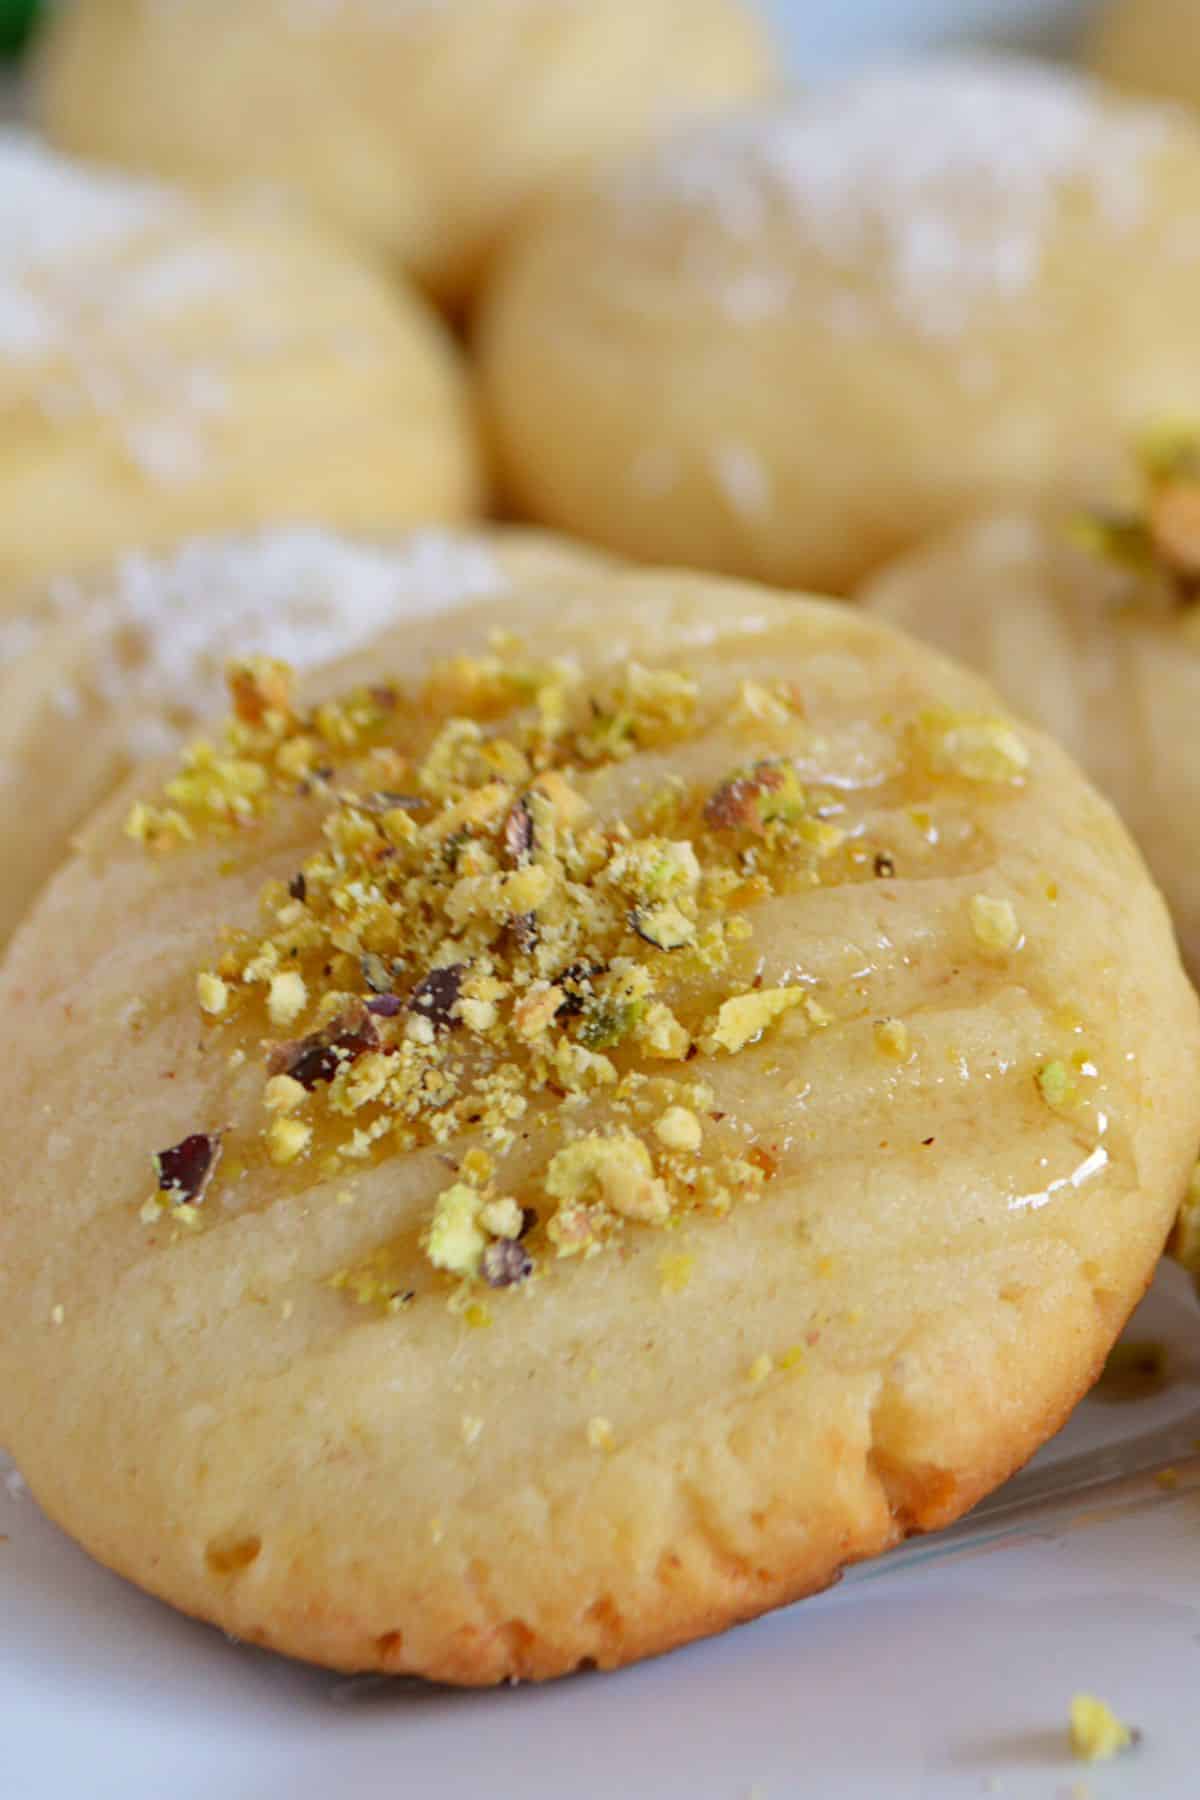 Şekerpare cookie garnished with pistachios.